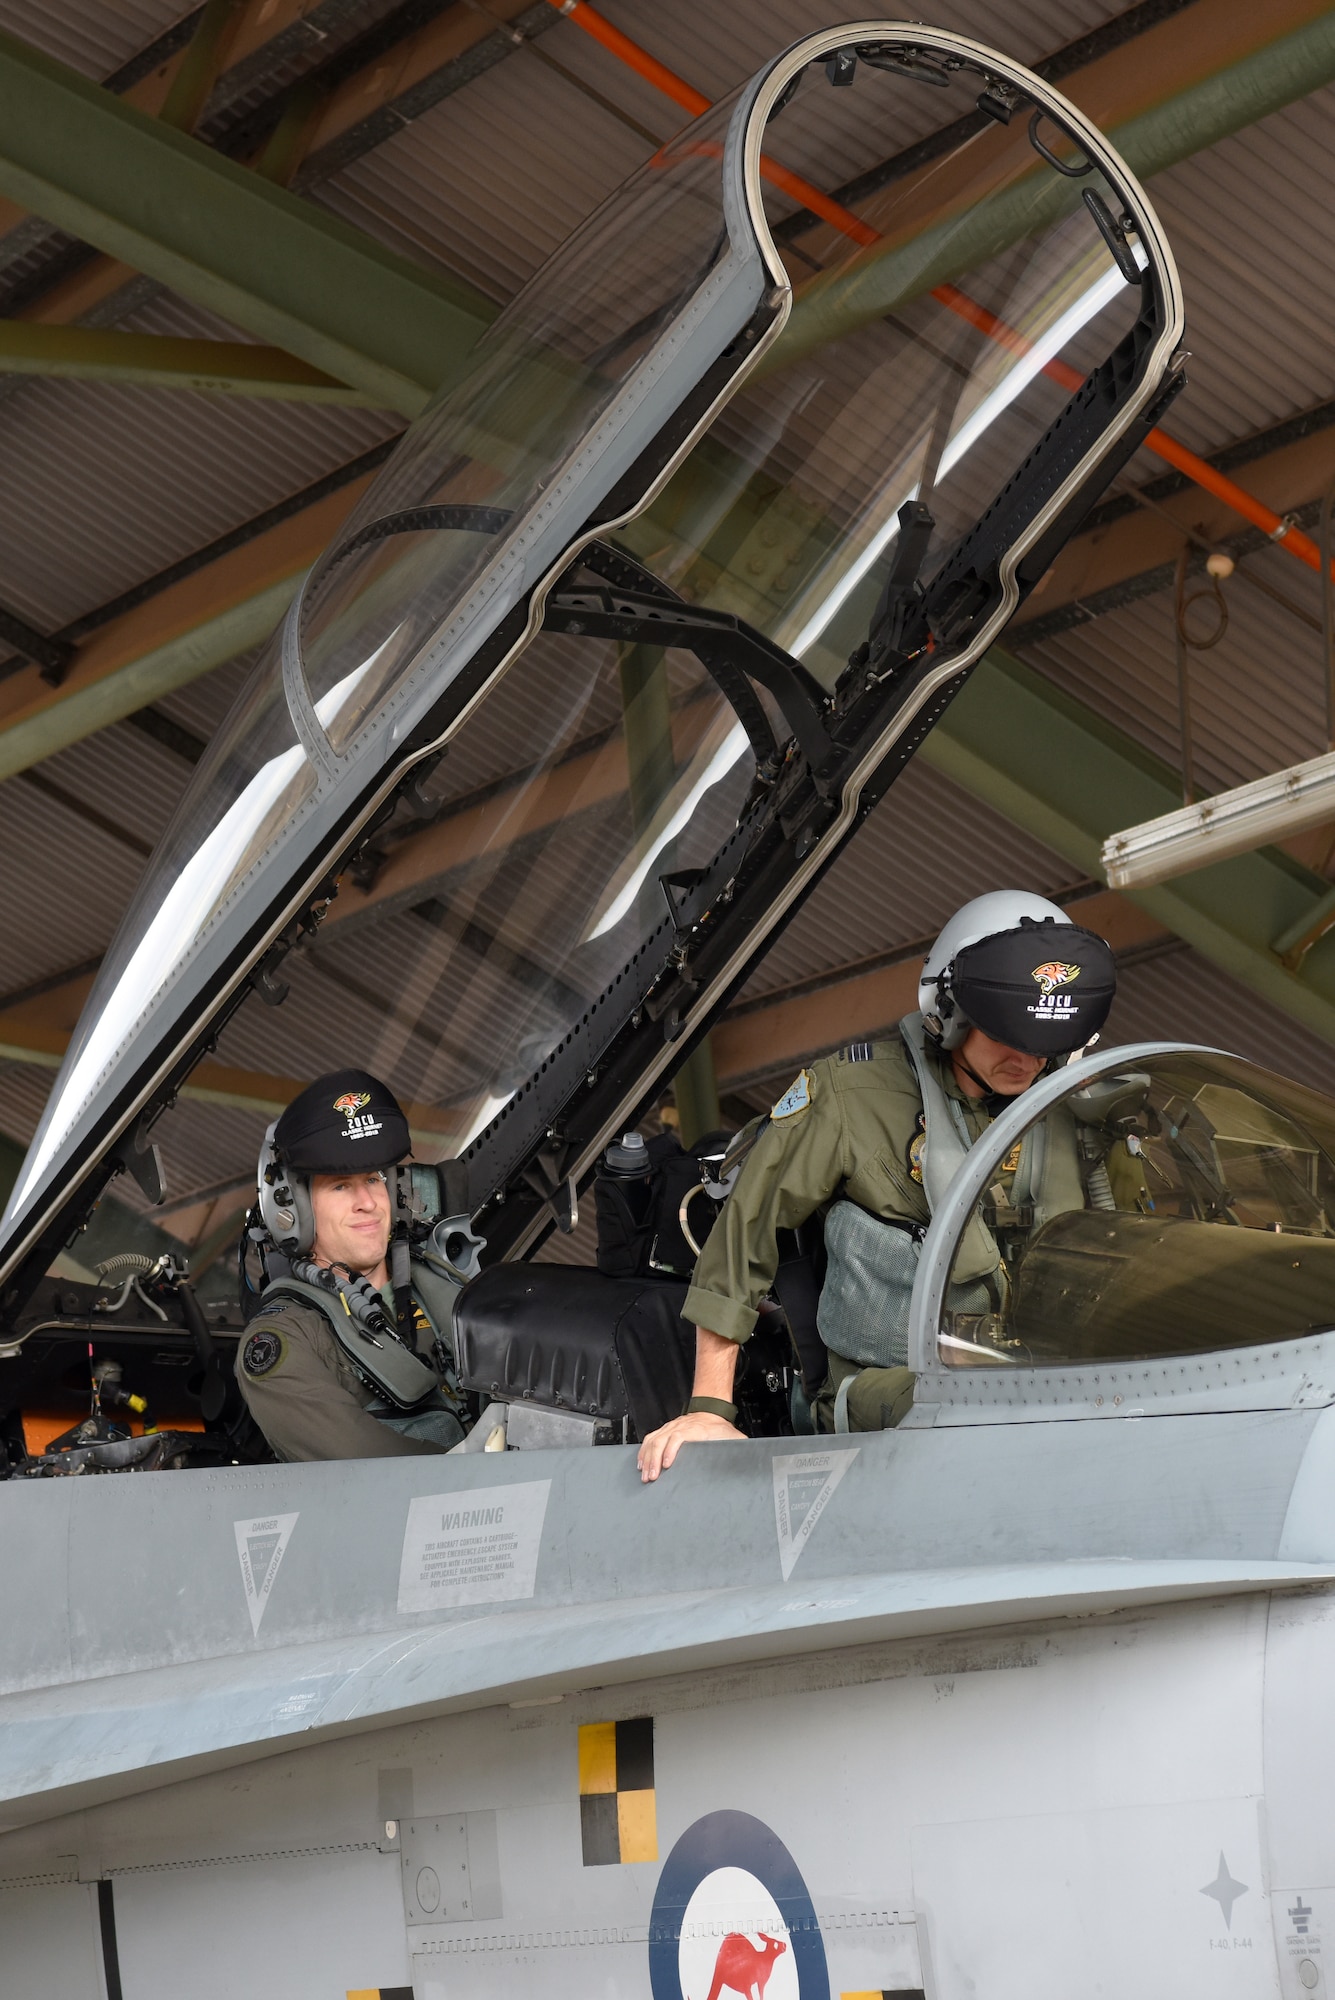 Two Royal Australian Air Force (RAAF) F/A-18B Hornet pilots prepare for takeoff during Exercise Diamond Storm at Royal Australian Air Force Base Darwin, Northern Territory, May 10, 2019.